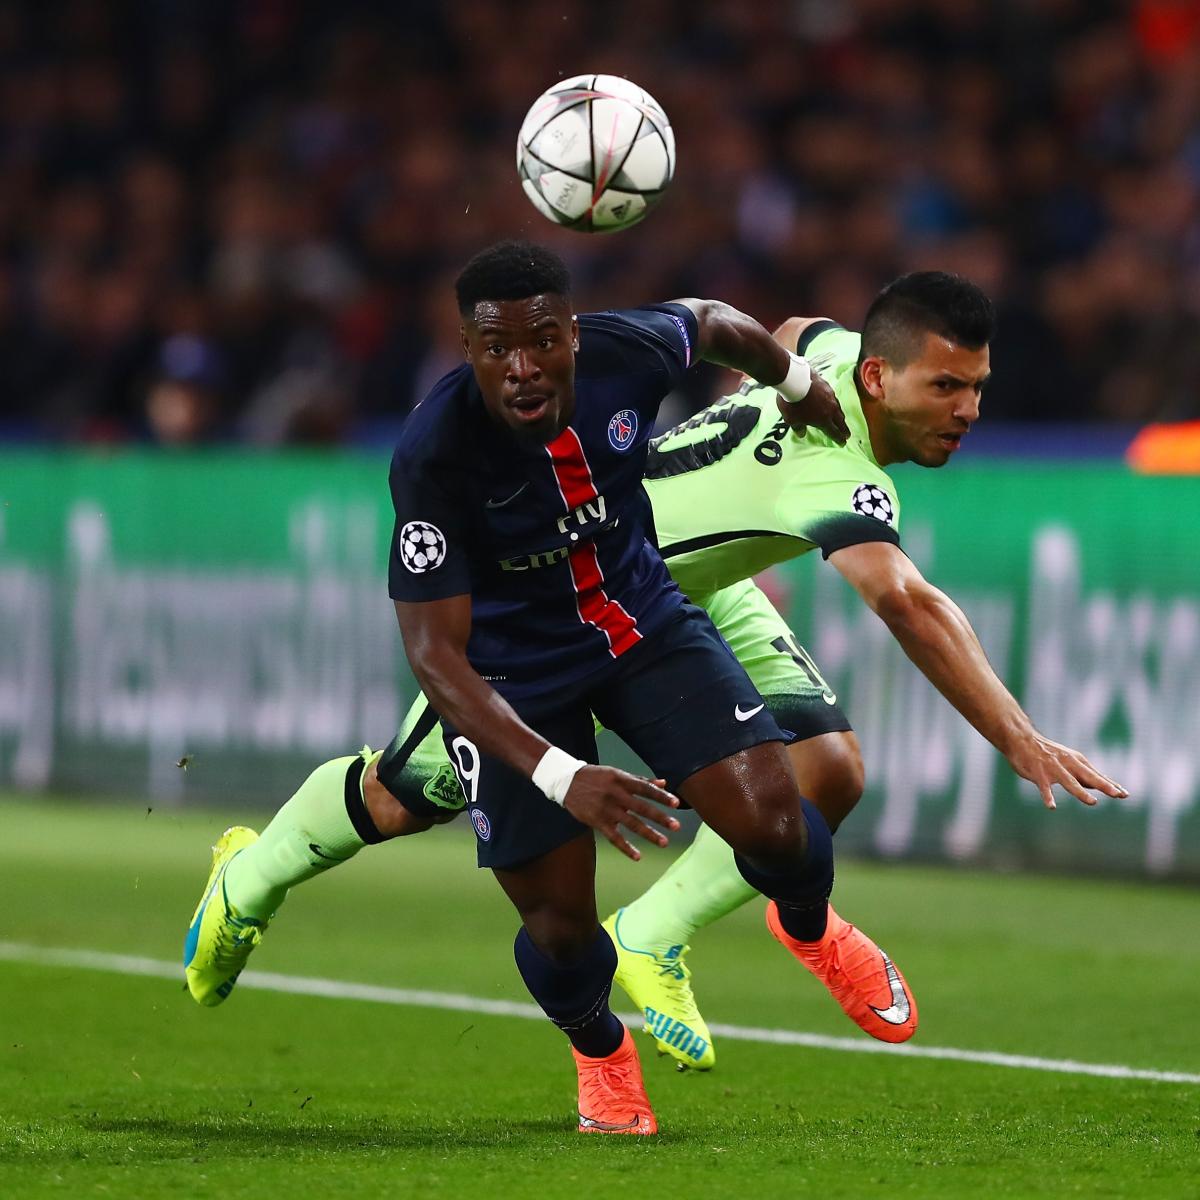 PSG vs. Manchester City: Goals, Highlights from Champions League Match